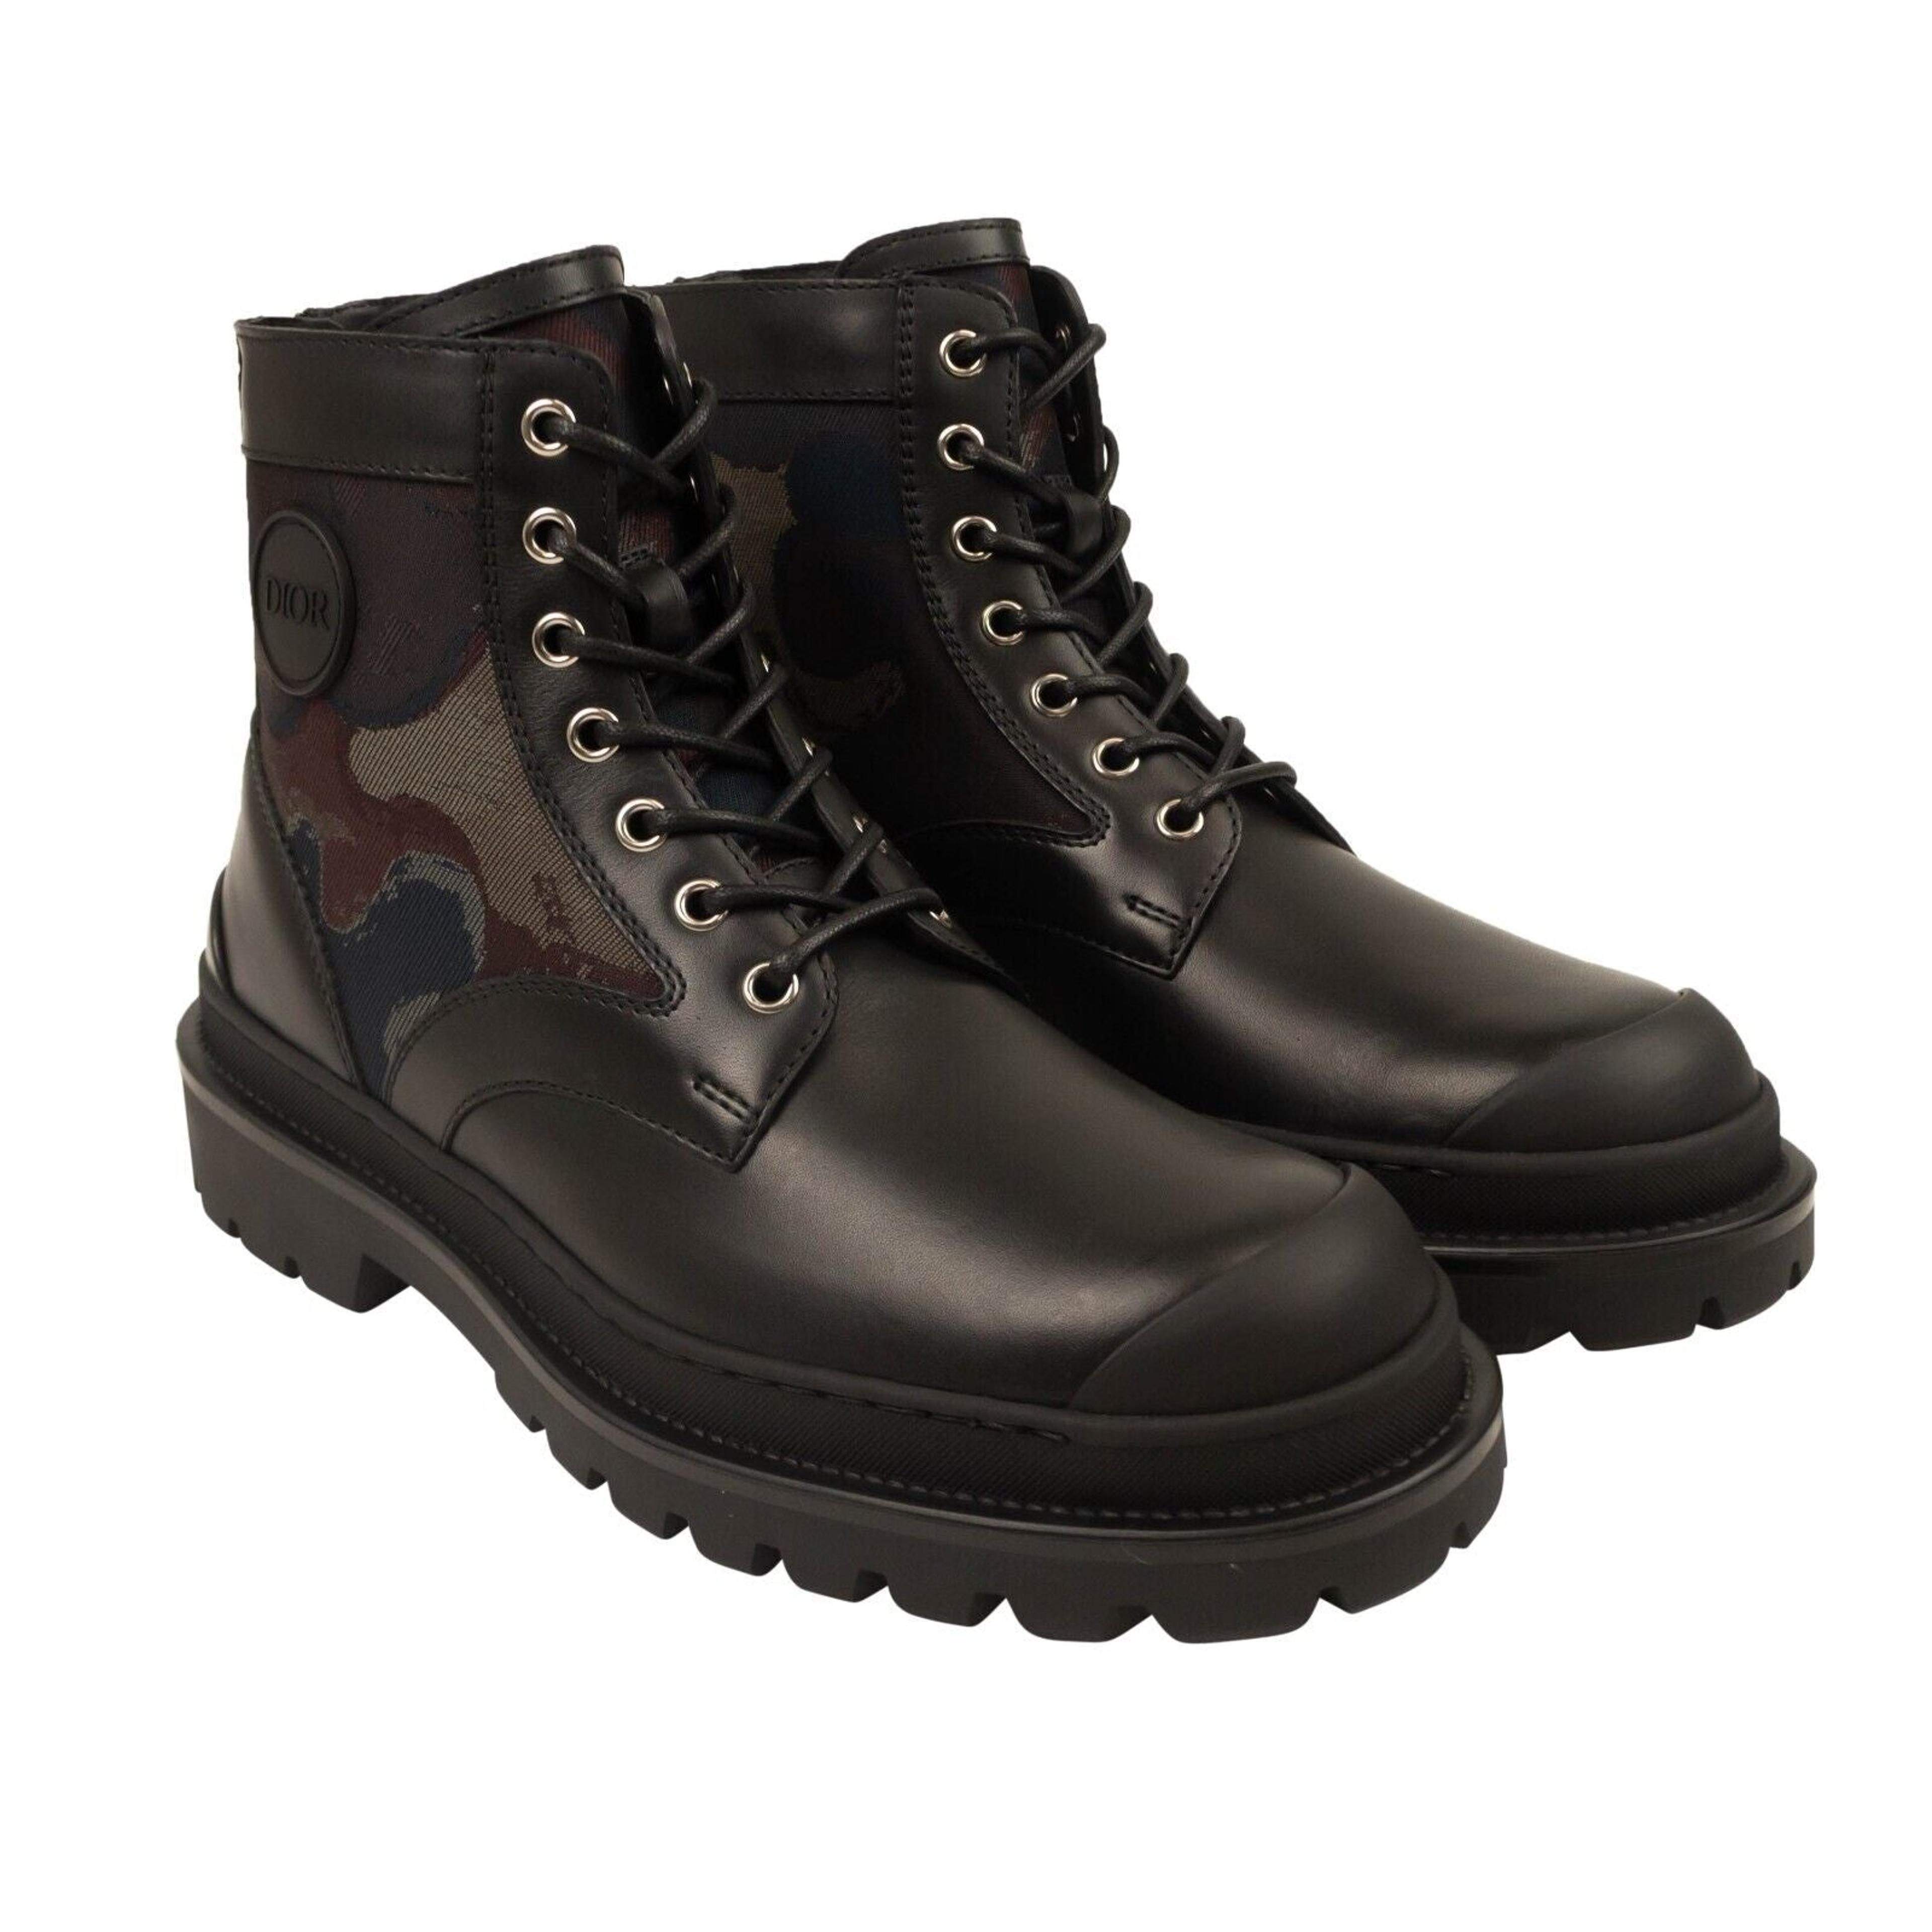 Alternate View 2 of X Peter Doig Black Leather Explorer Boots